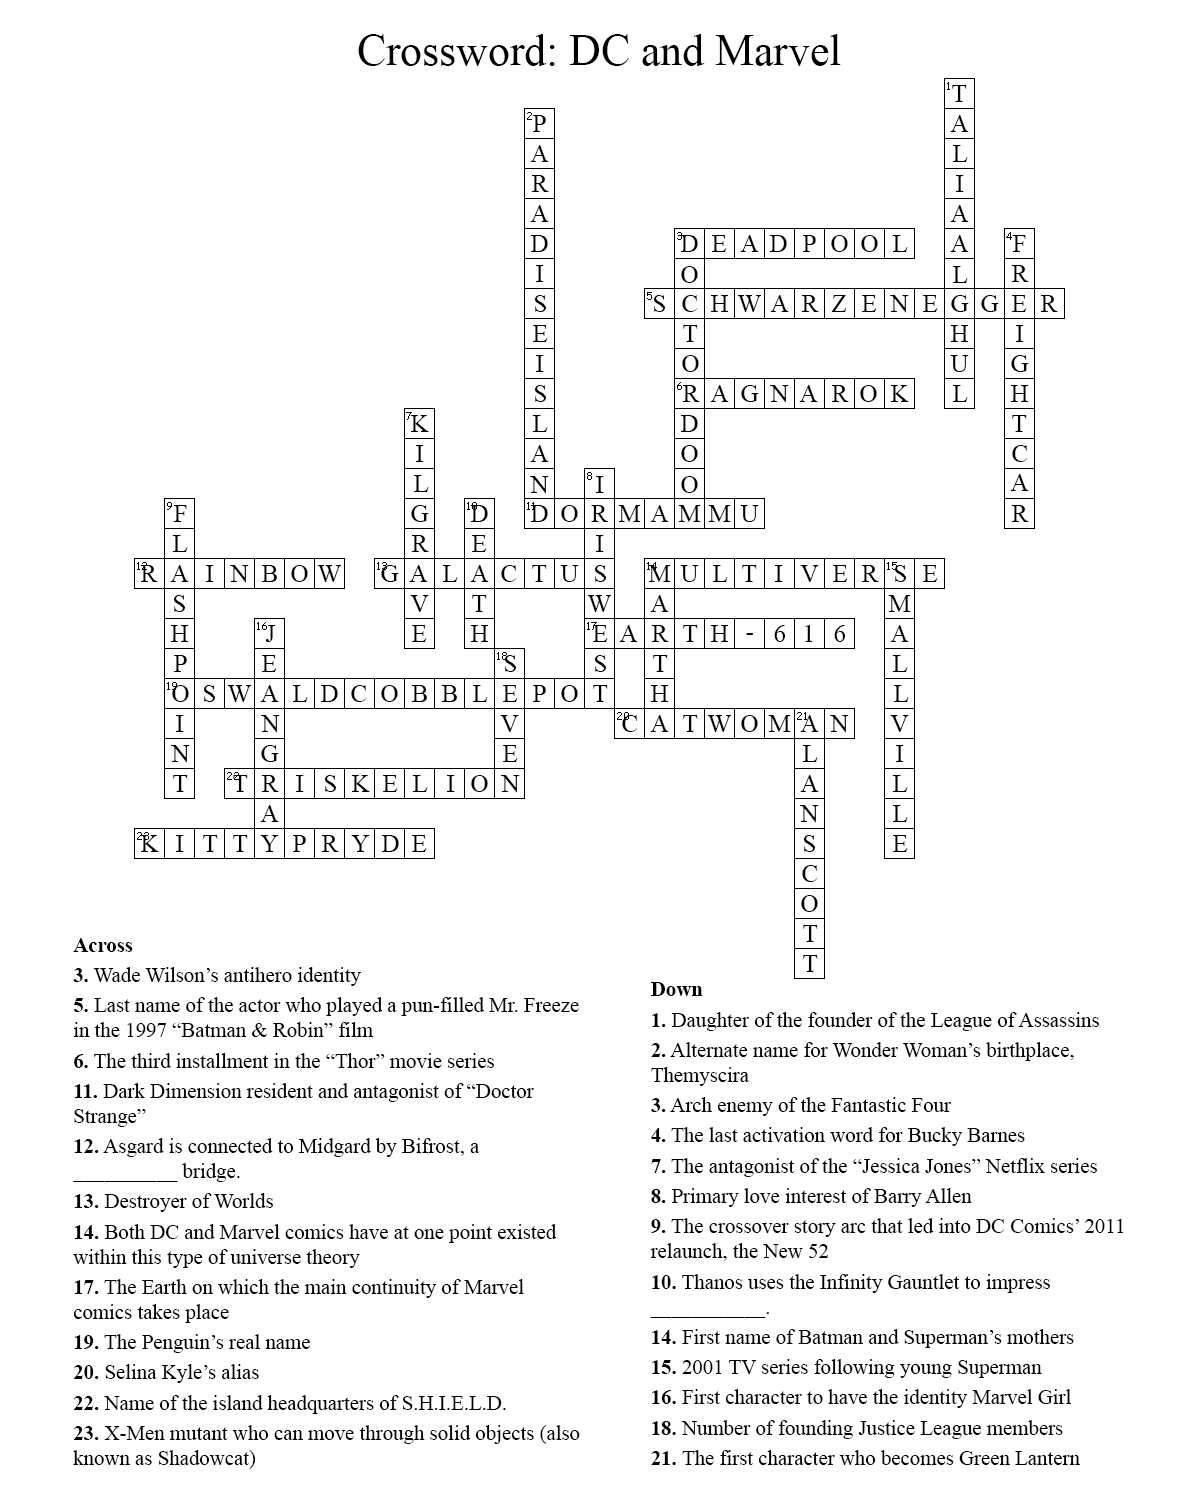 GRAPHIC: The answer key to the "DC and Marvel" crossword puzzle. Graphic created by The Signal online editor, Krista Kamp.